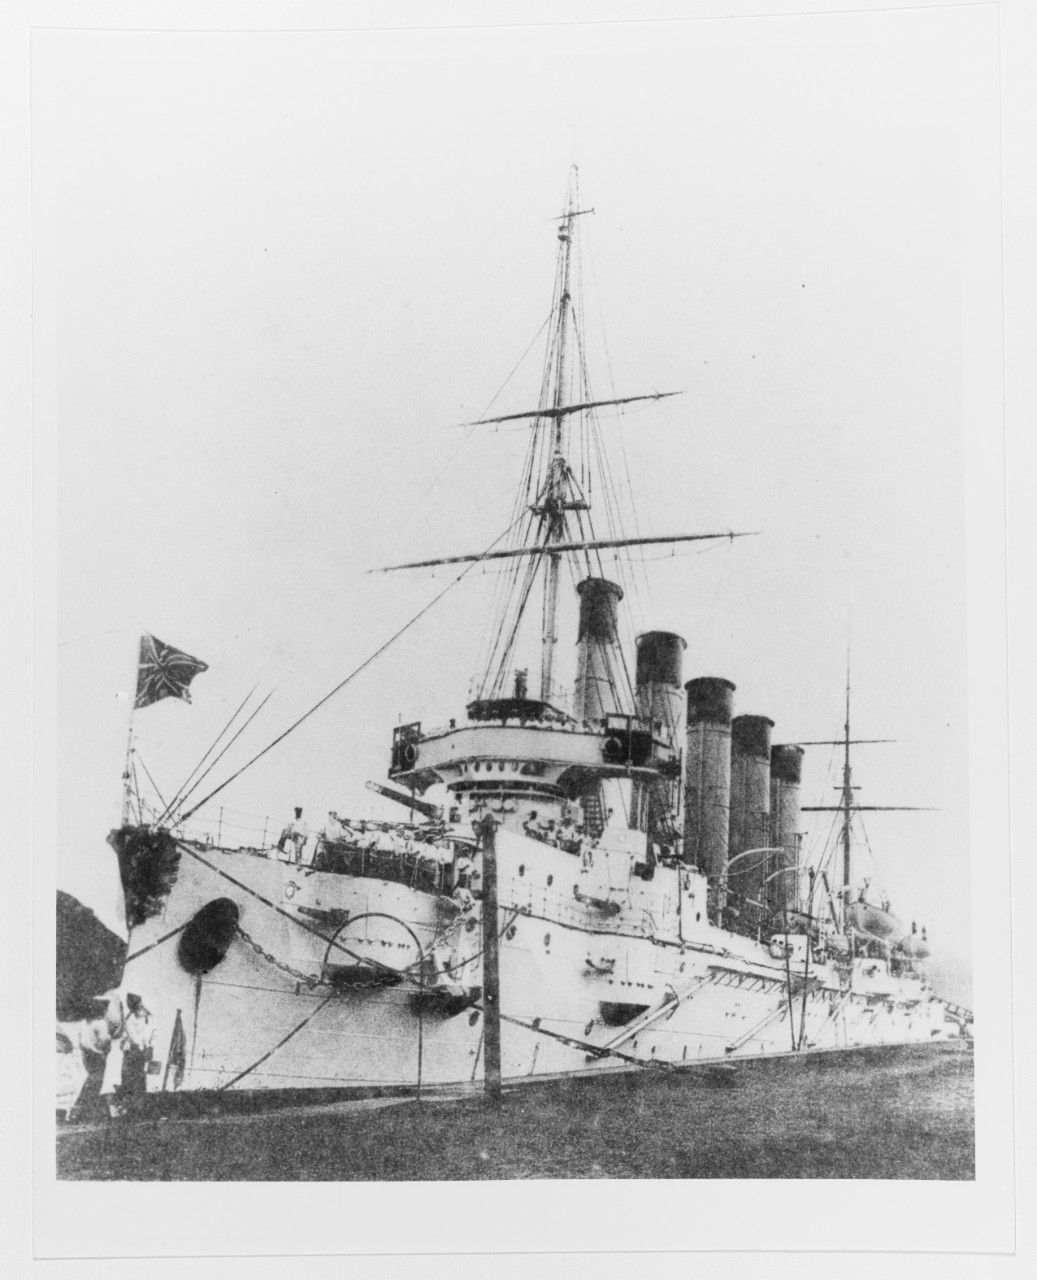 ASKOLD (Russian protected cruiser, 1900-ca. 1920)